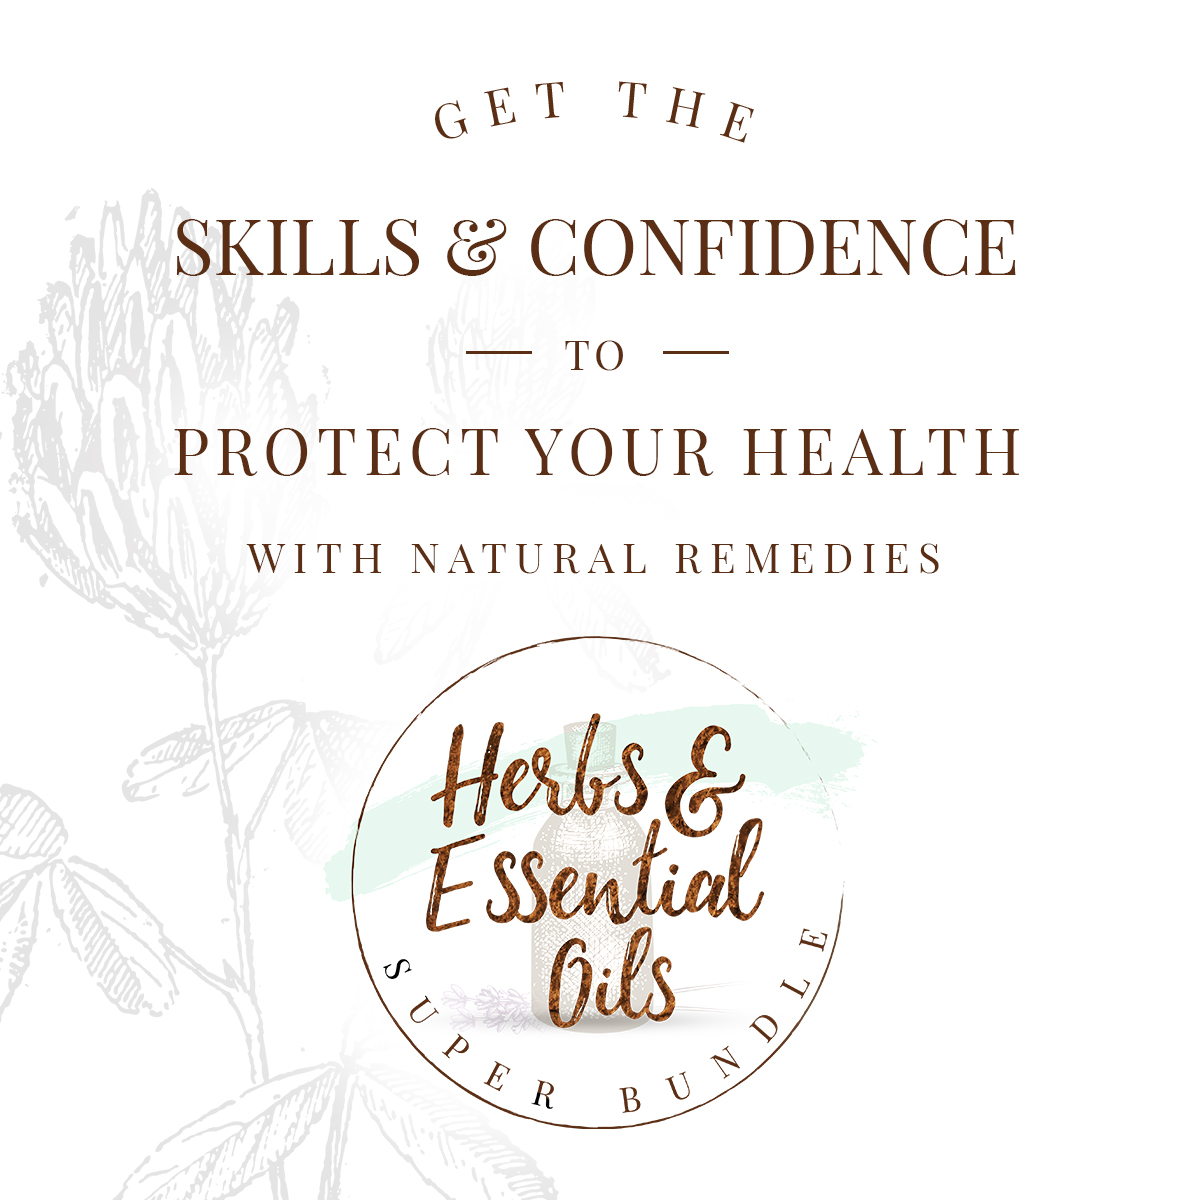 Take Charge Of Your Family's Health With The Herbs & Essential Oils Super Bundle | Growing Up Herbal | Learn how to take charge of your family's health confidently, safely, and effectively!